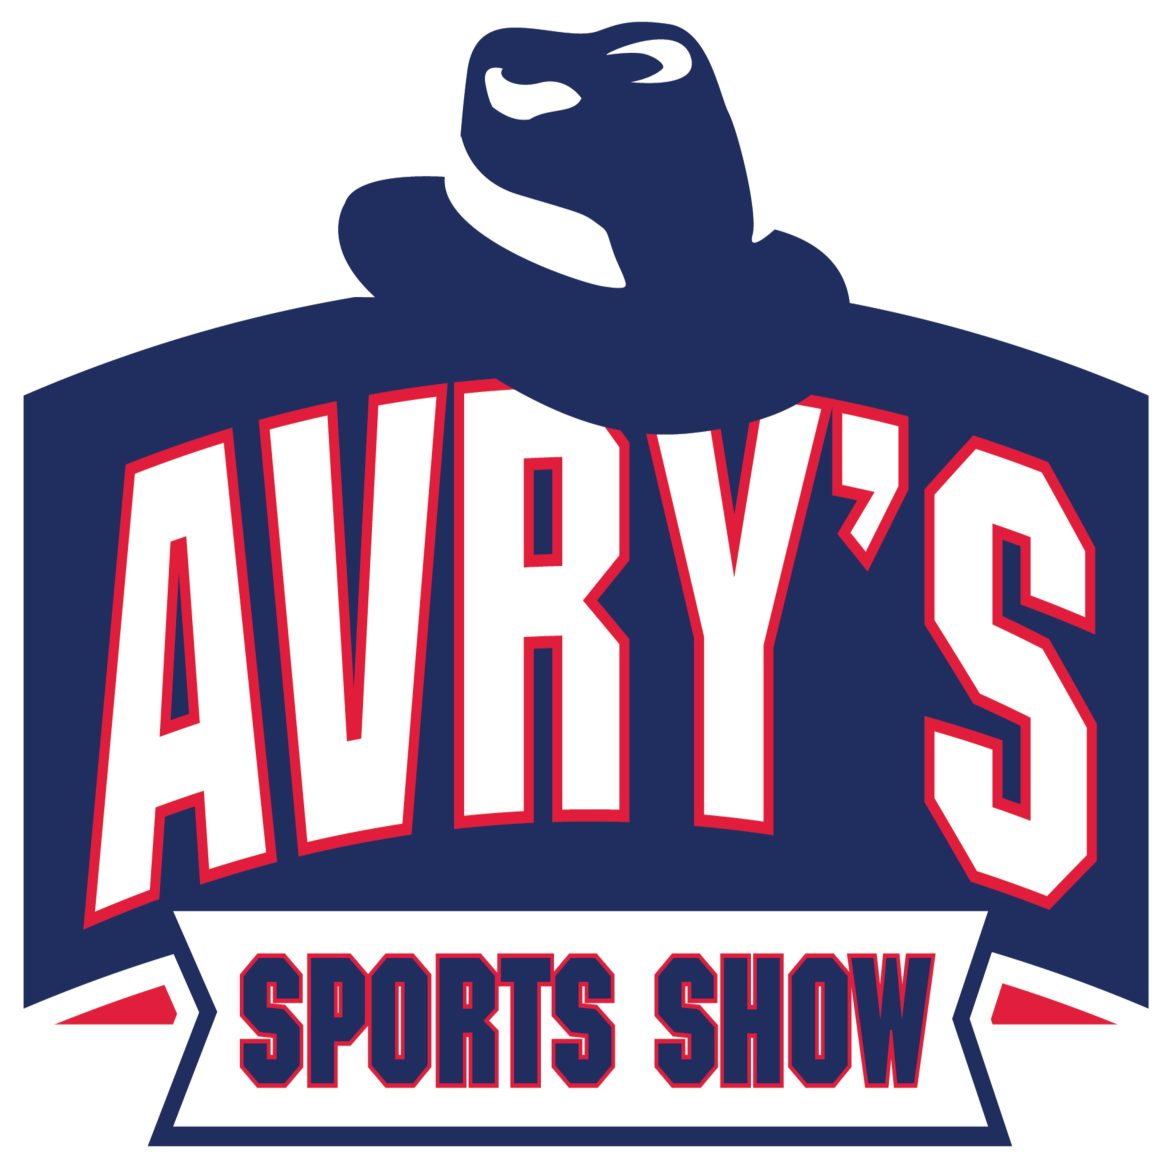 Black Podcasting - Avry's Sports Show: Andrew Parker (August 2015)